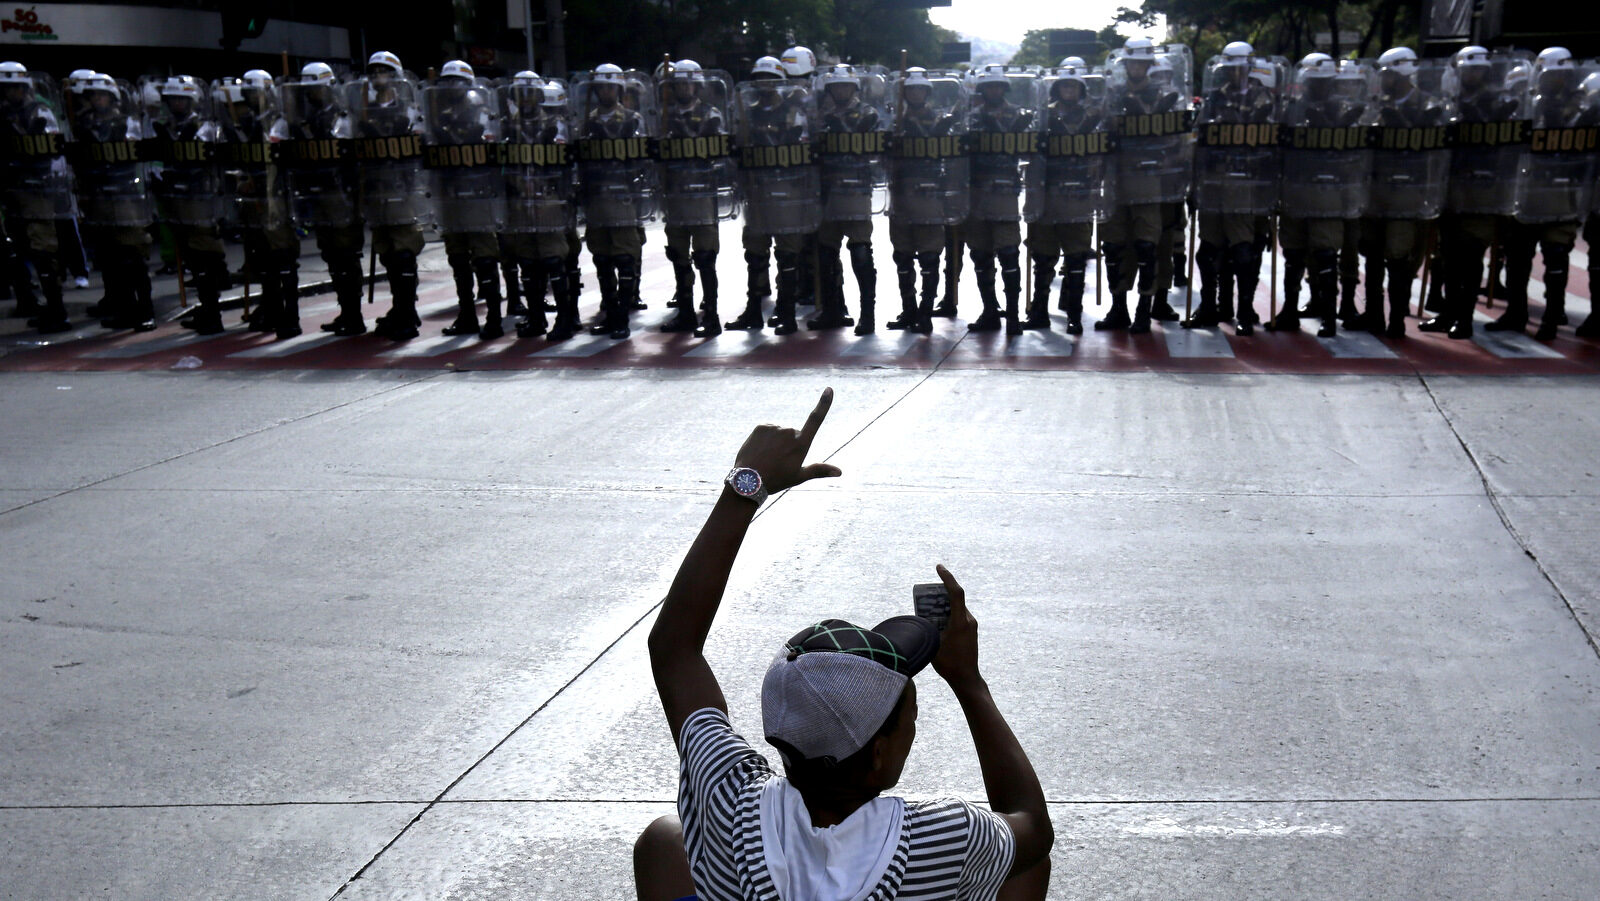 A demonstrator films a line of police during a protest against the World Cup in Rio de Janeiro, Brazil. (AP Photo/Bruno Magalhaes, File)